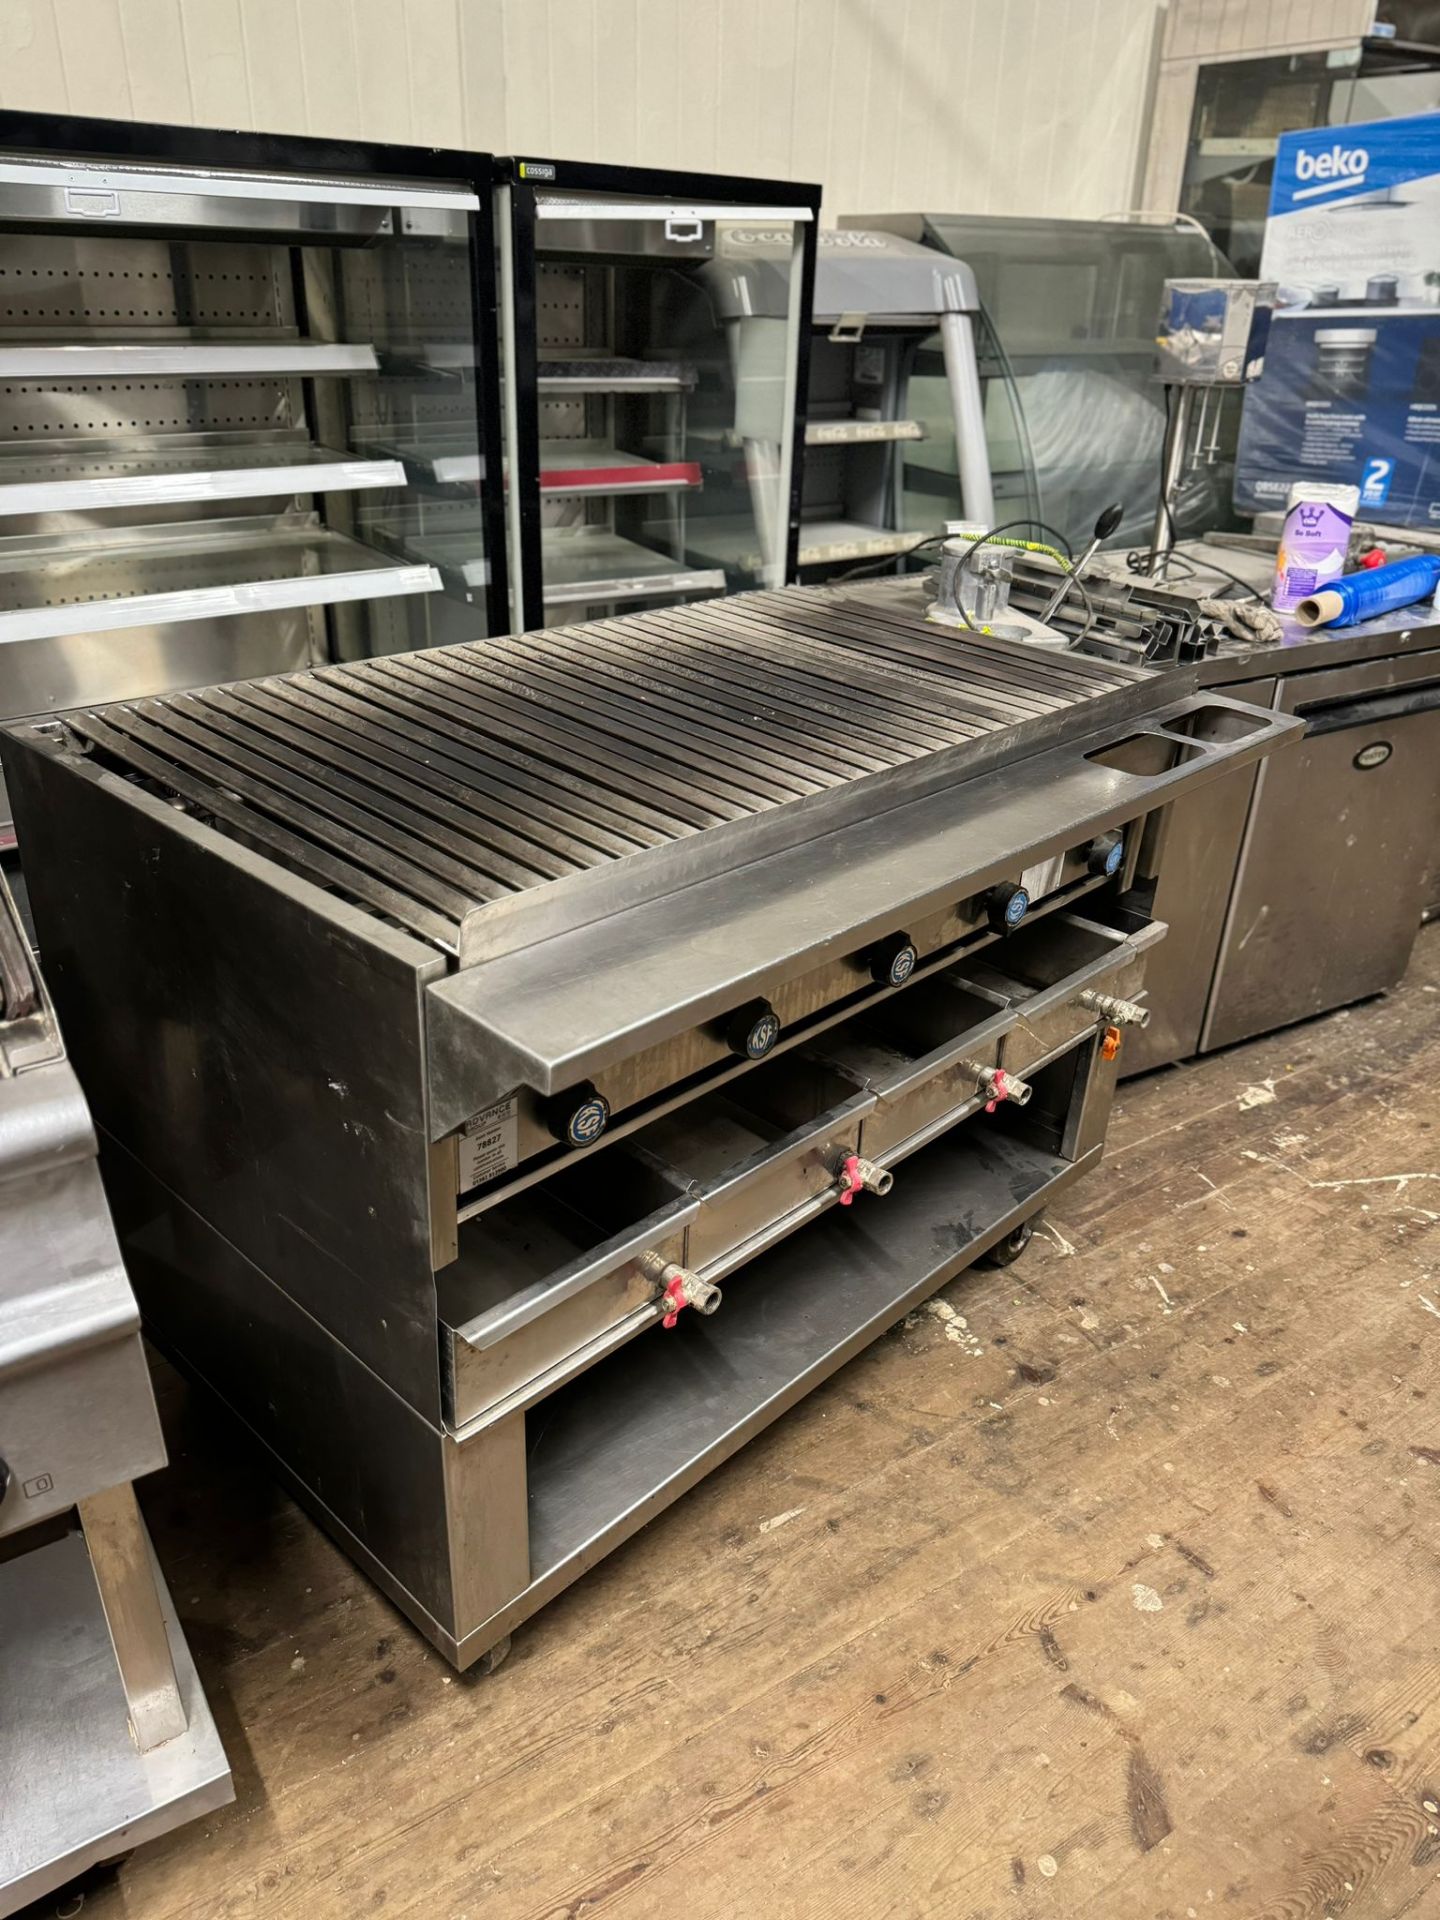 KSF CHARGRILL WITH WATER TRAY UNDER - 120 CM W - 5 BURNER NATURAL GAS BROILER  - Image 6 of 6